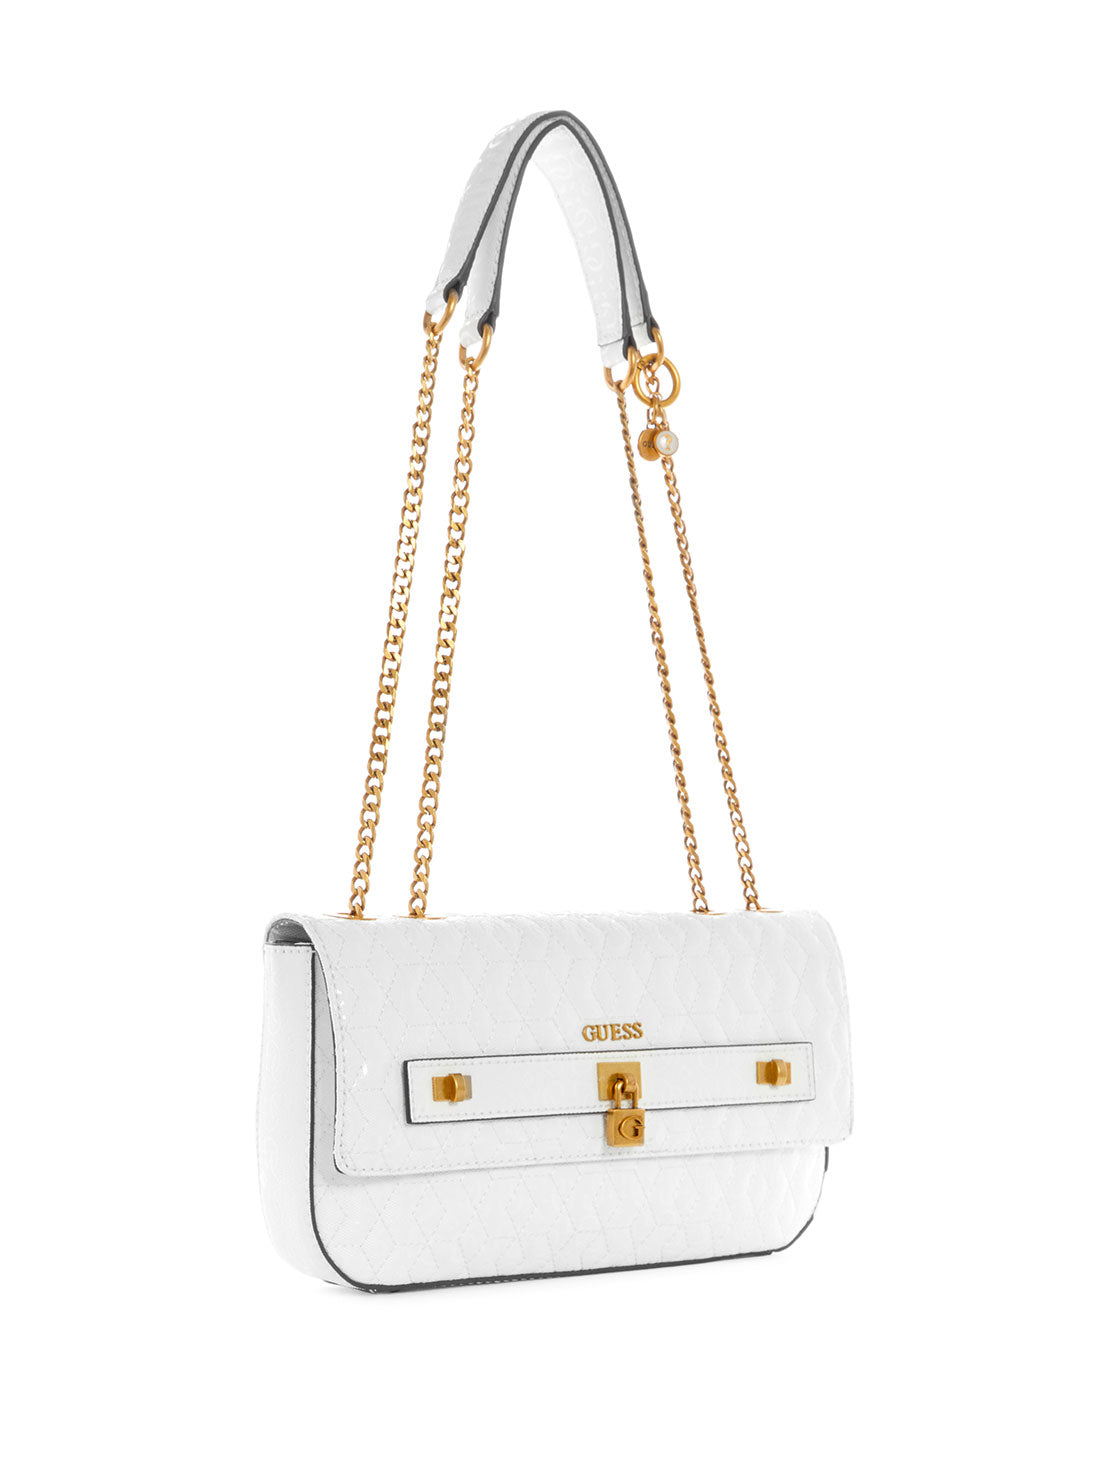 GUESS Womens White Isidora Convertible Crossbody Bag GB854721 Front Side View